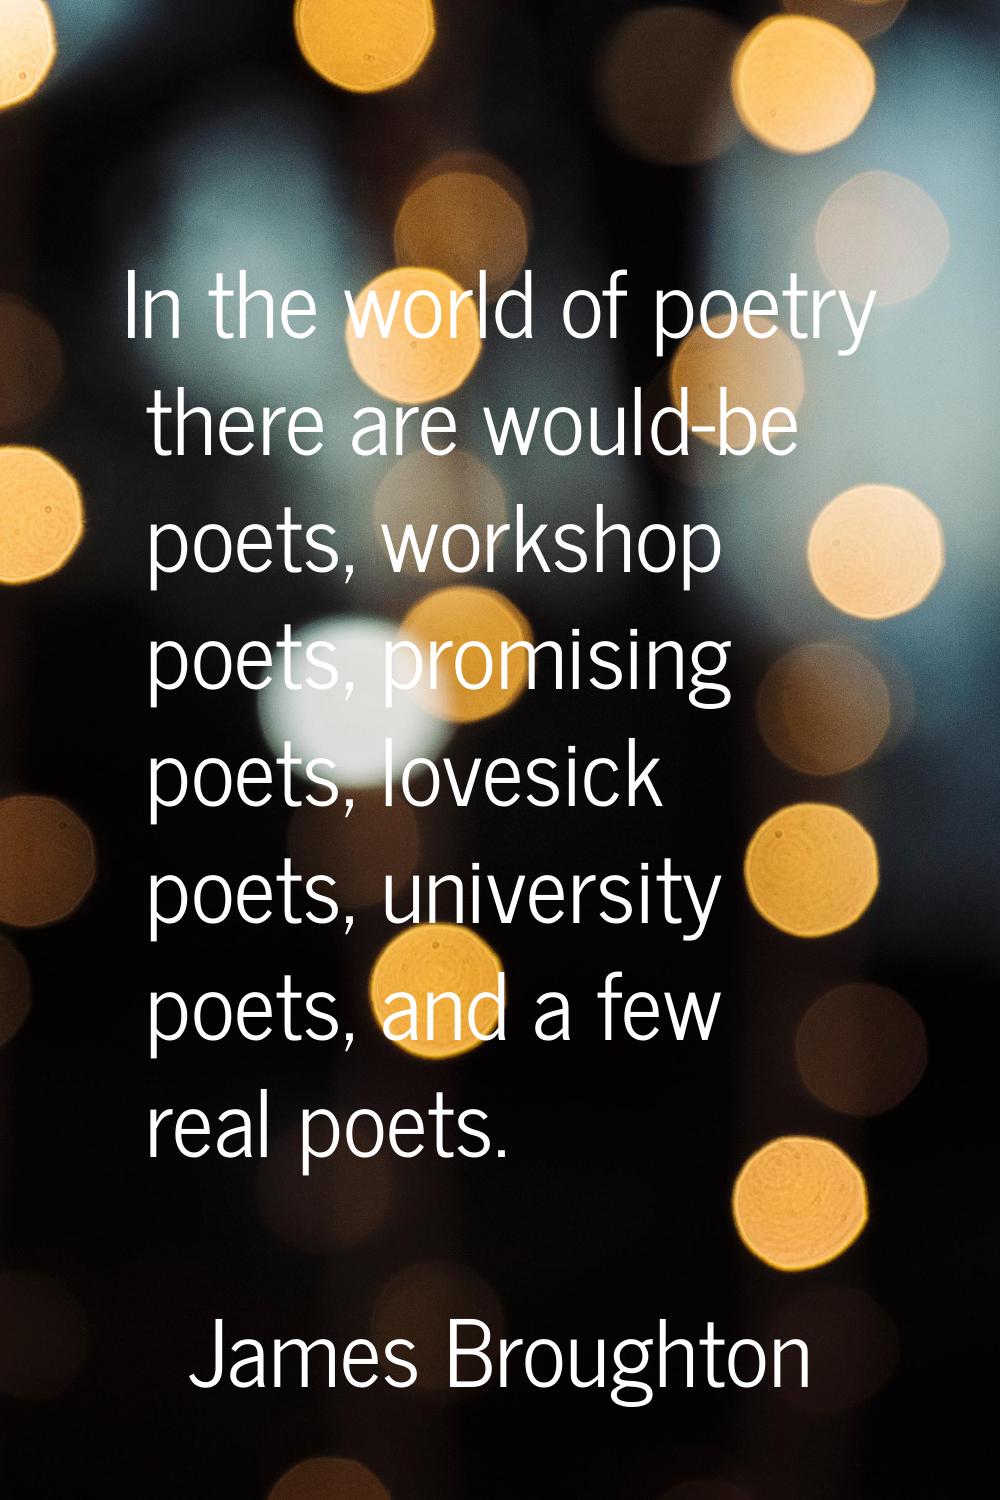 In the world of poetry there are would-be poets, workshop poets, promising poets, lovesick poets, u